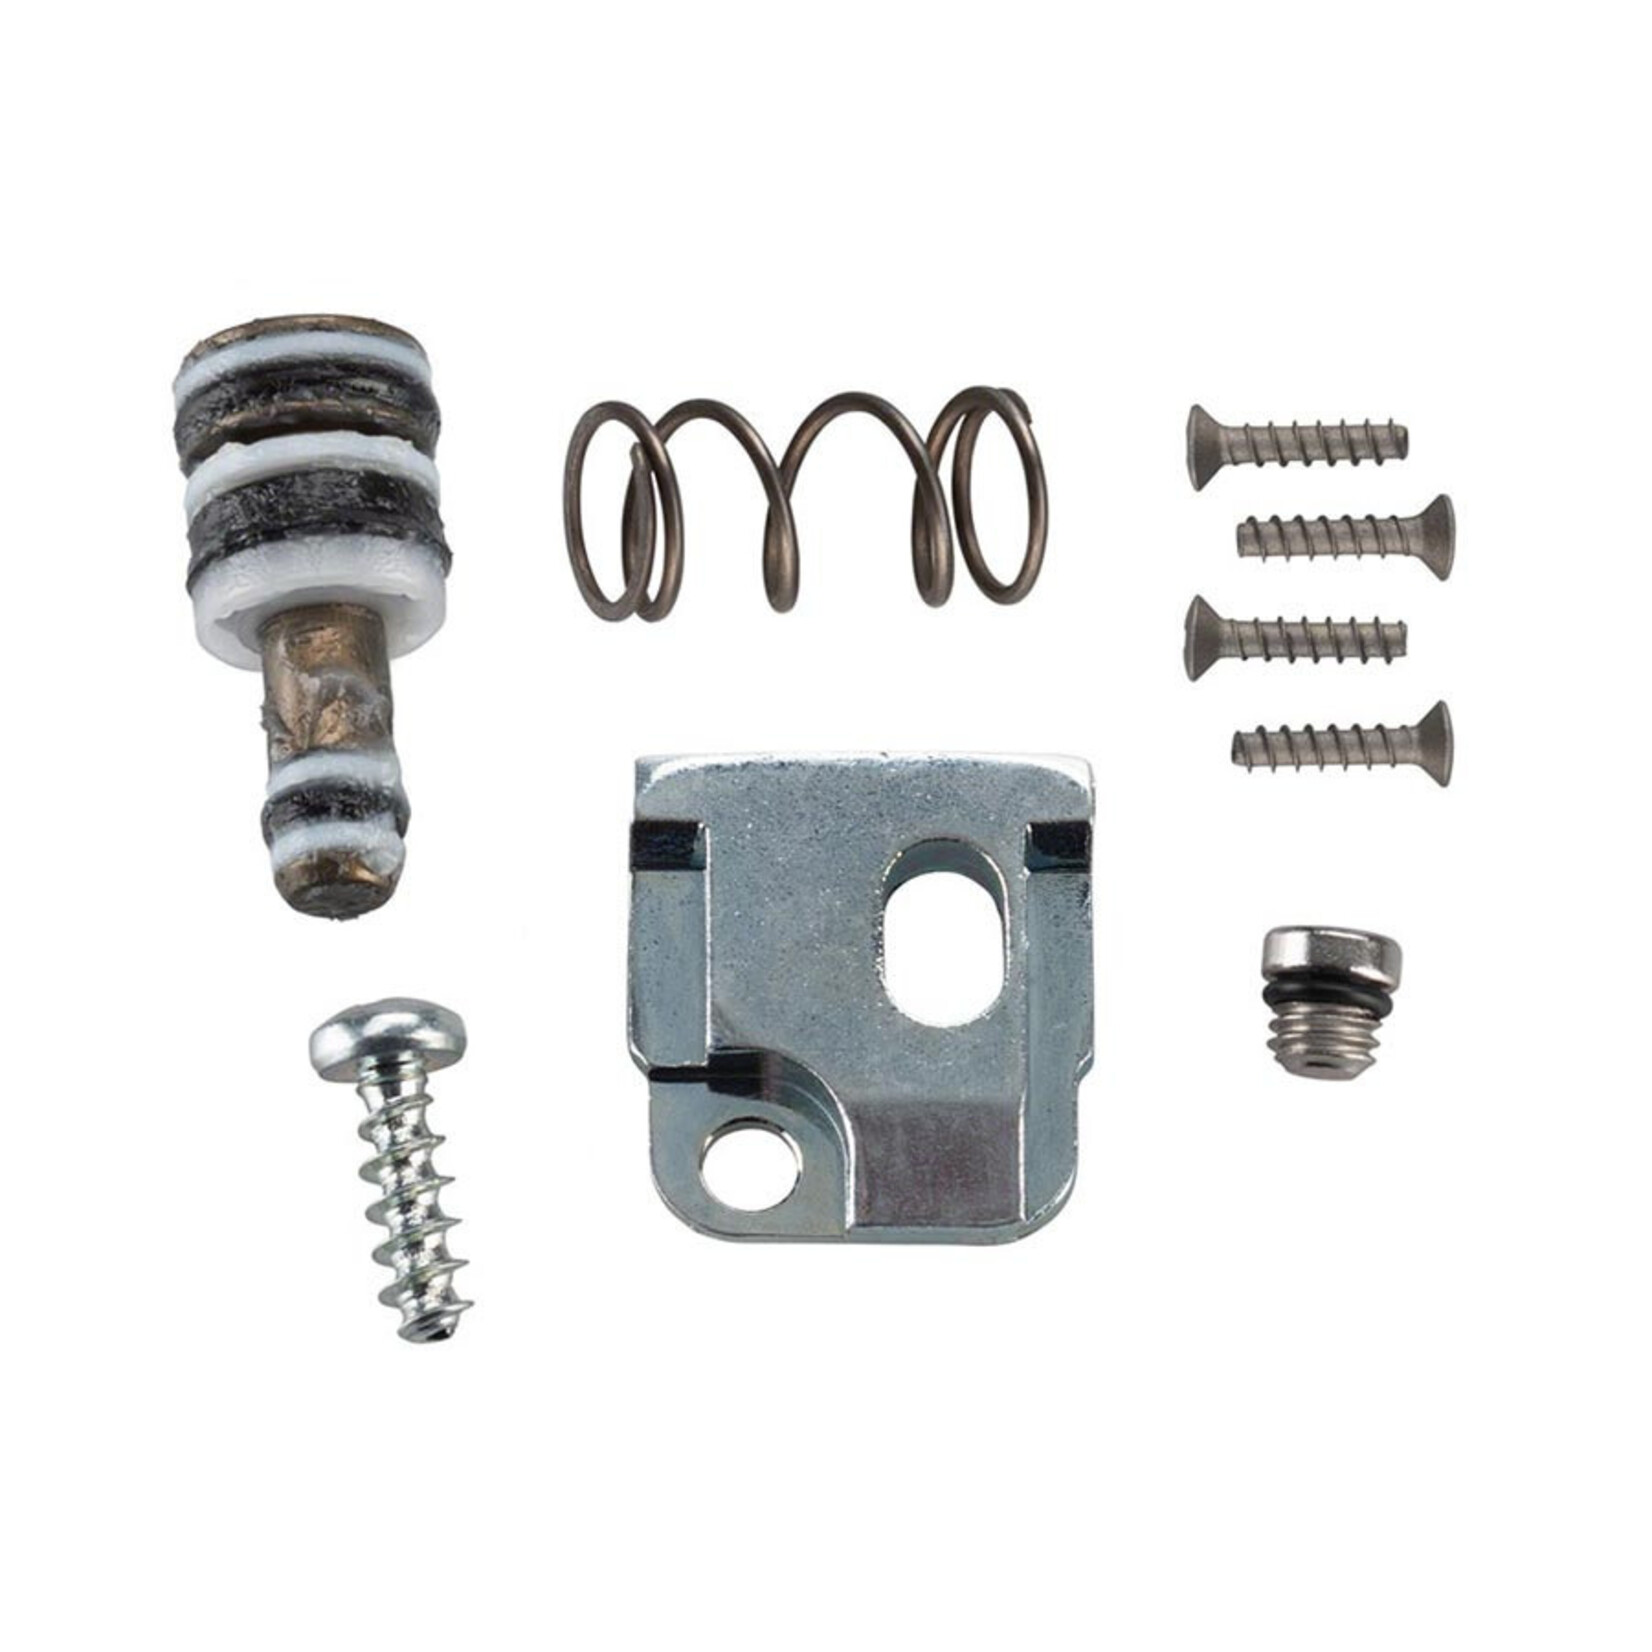 SRAM SRAM HRD/HRR Hydraulic Brake Master Piston Assembly Kit with Piston Plate and Bleed Screw Left/Front Lever